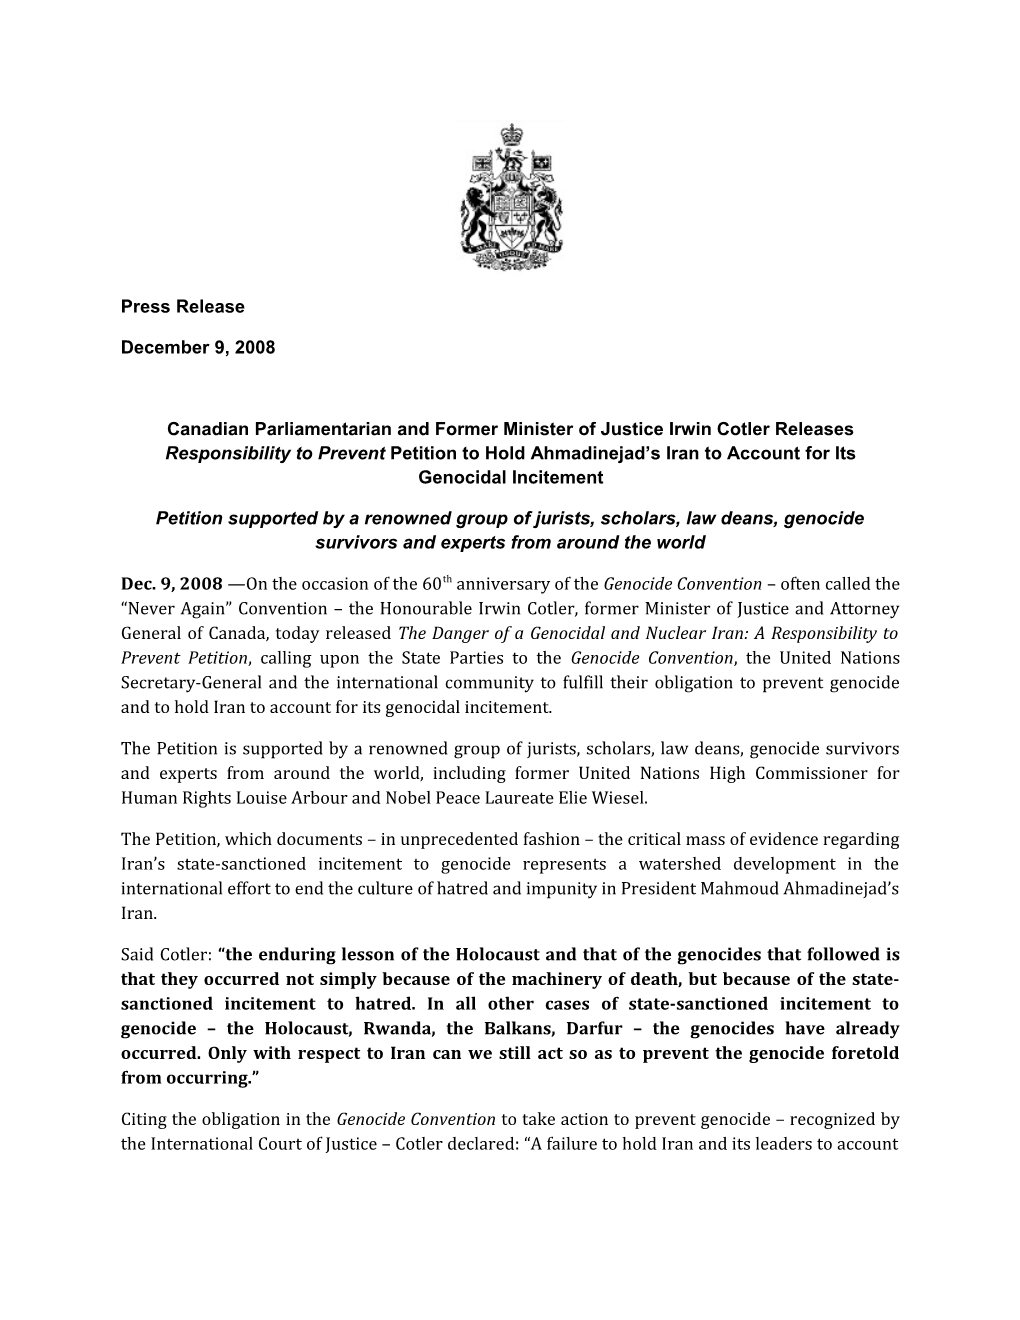 Canadian Parliamentarian and Former Minister of Justice Irwin Cotler Releases Responsibility